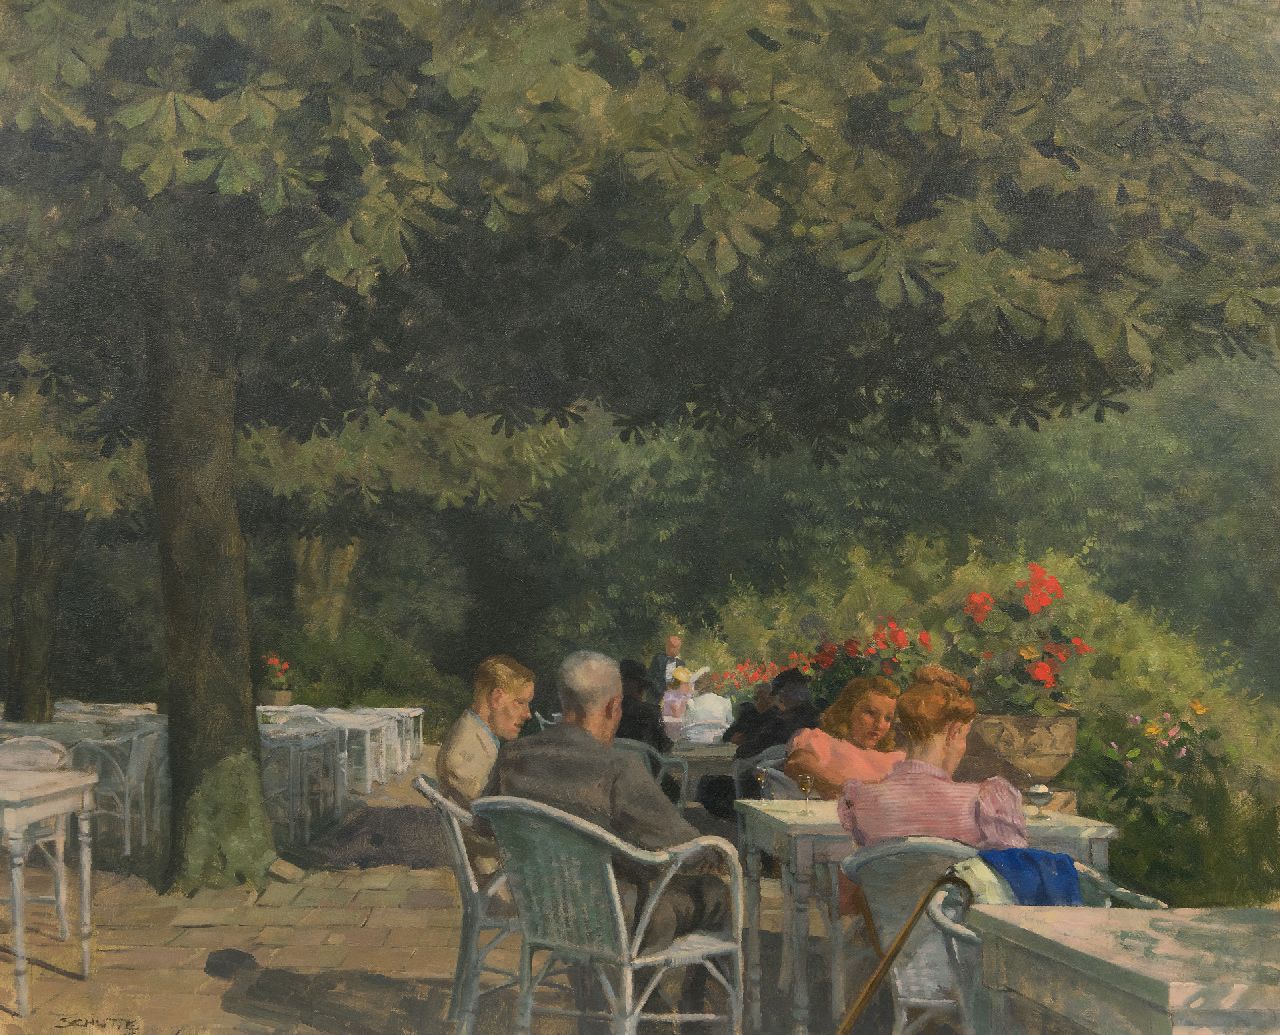 Schutte L.H.H.  | 'Louis' Hermanus Hendrikus Schutte | Paintings offered for sale | A summer day on the terrace, oil on canvas 77.7 x 94.5 cm, signed l.l.